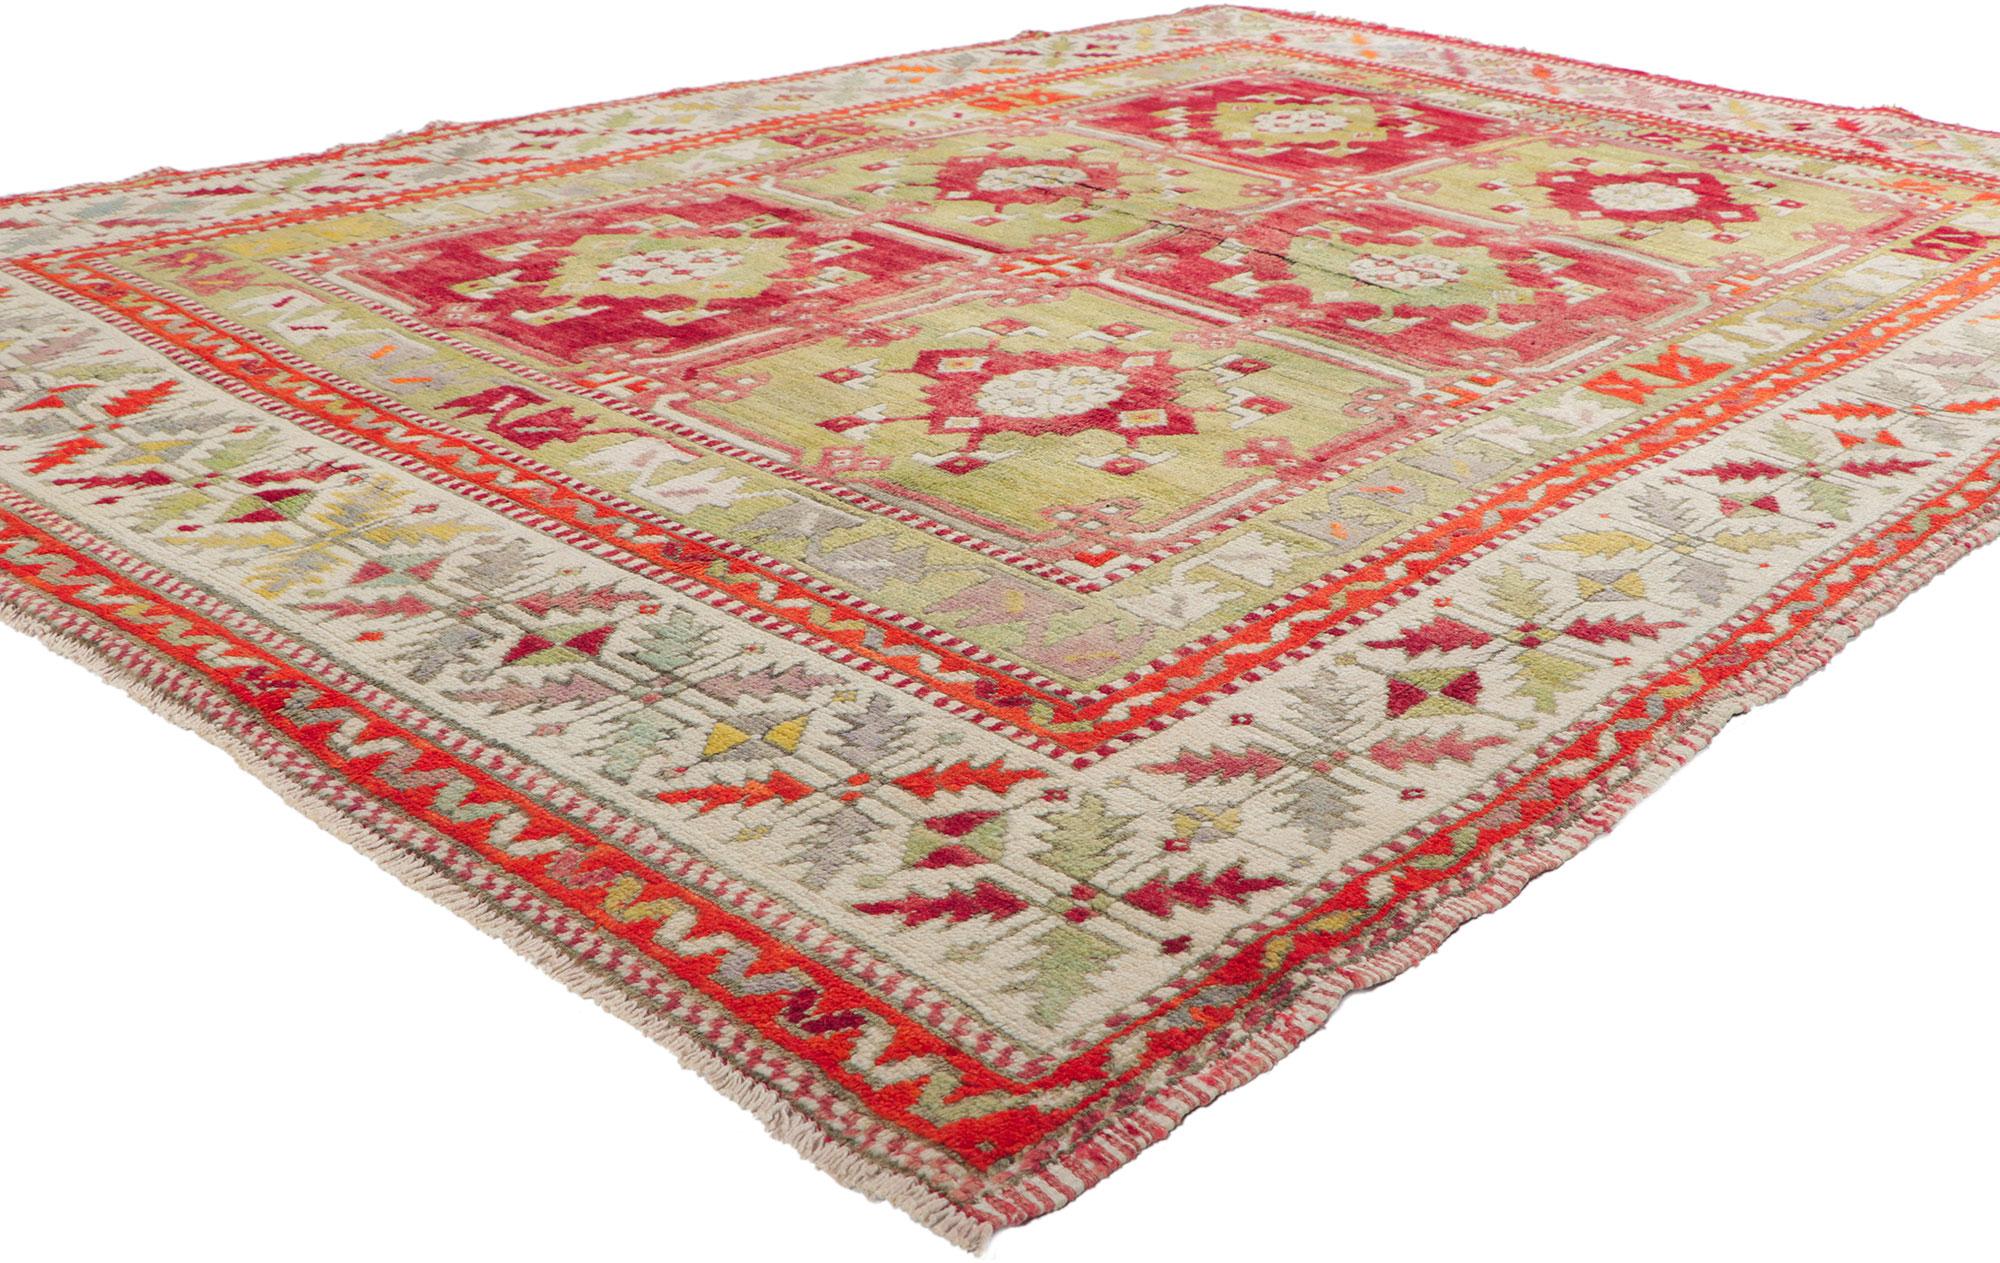 51780 Vintage Turkish Oushak rug, 06'03 x 08'09.
Showcasing a bold geometric design, incredible detail and texture, this hand knitted wool vintage Turkish Oushak rug is a captivating vision of woven beauty. The eye-catching compartmental design and